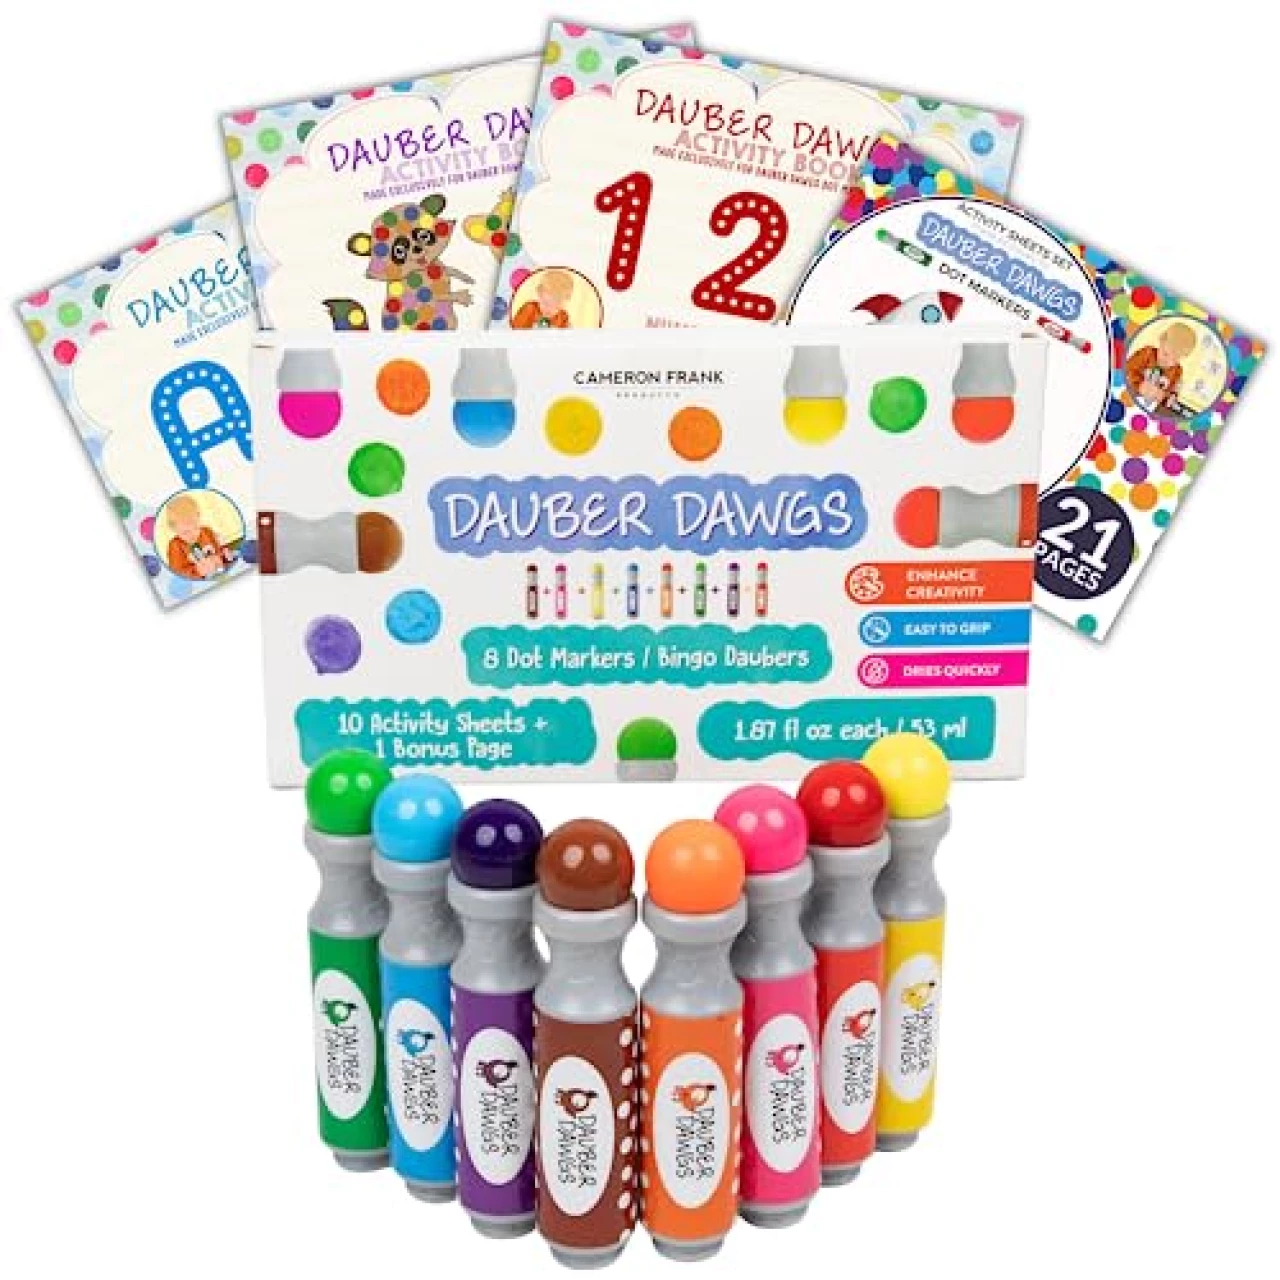 Cameron Frank Products Dot Markers for Toddlers 1-3 - Set of 8 Dauber Dawgs Washable Dot Paints with 3 Activity Book PDFs